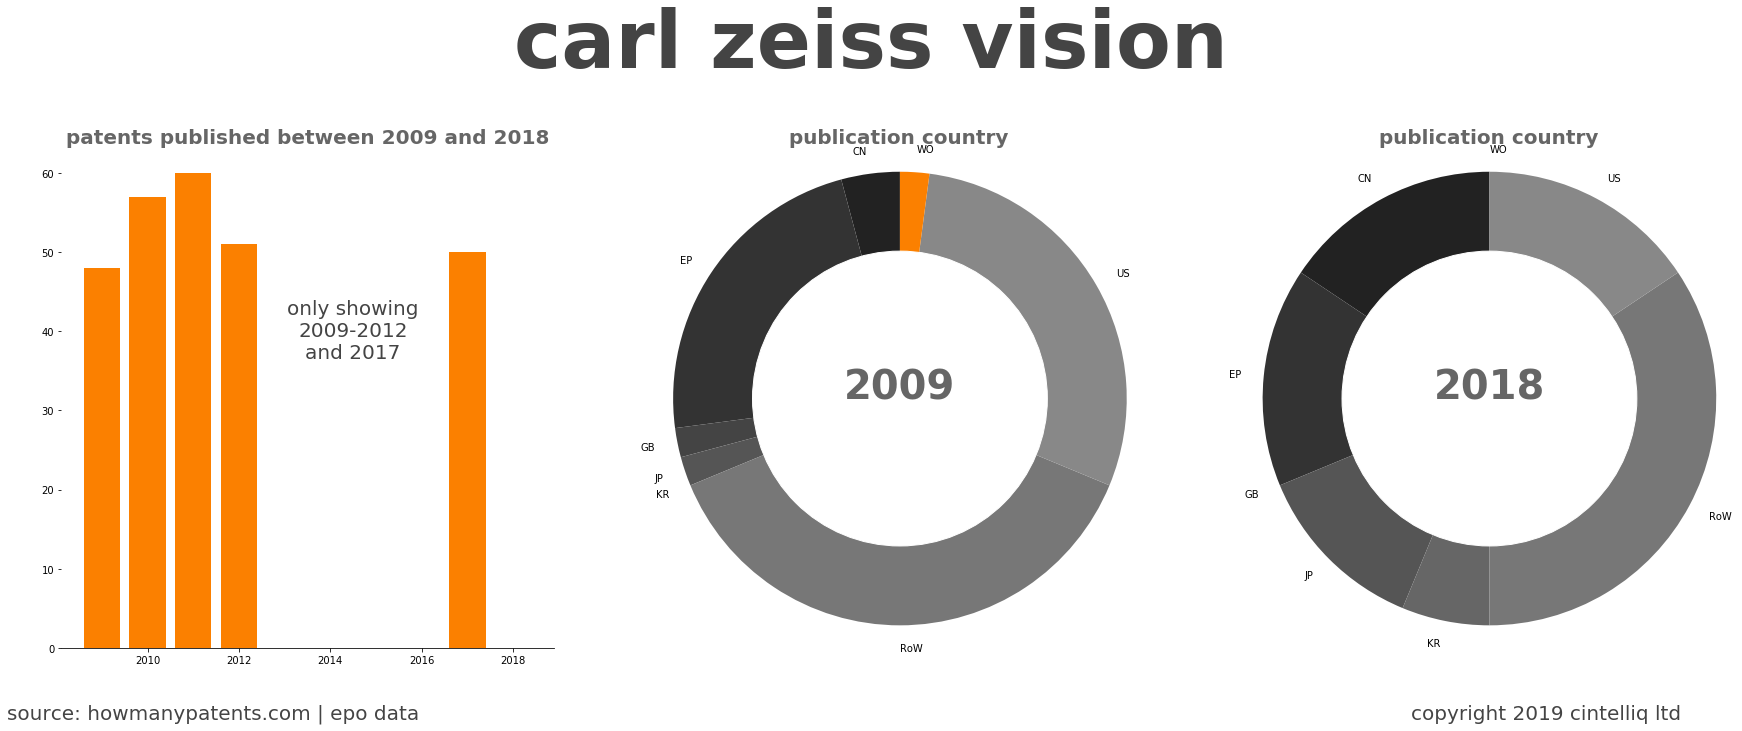 summary of patents for Carl Zeiss Vision